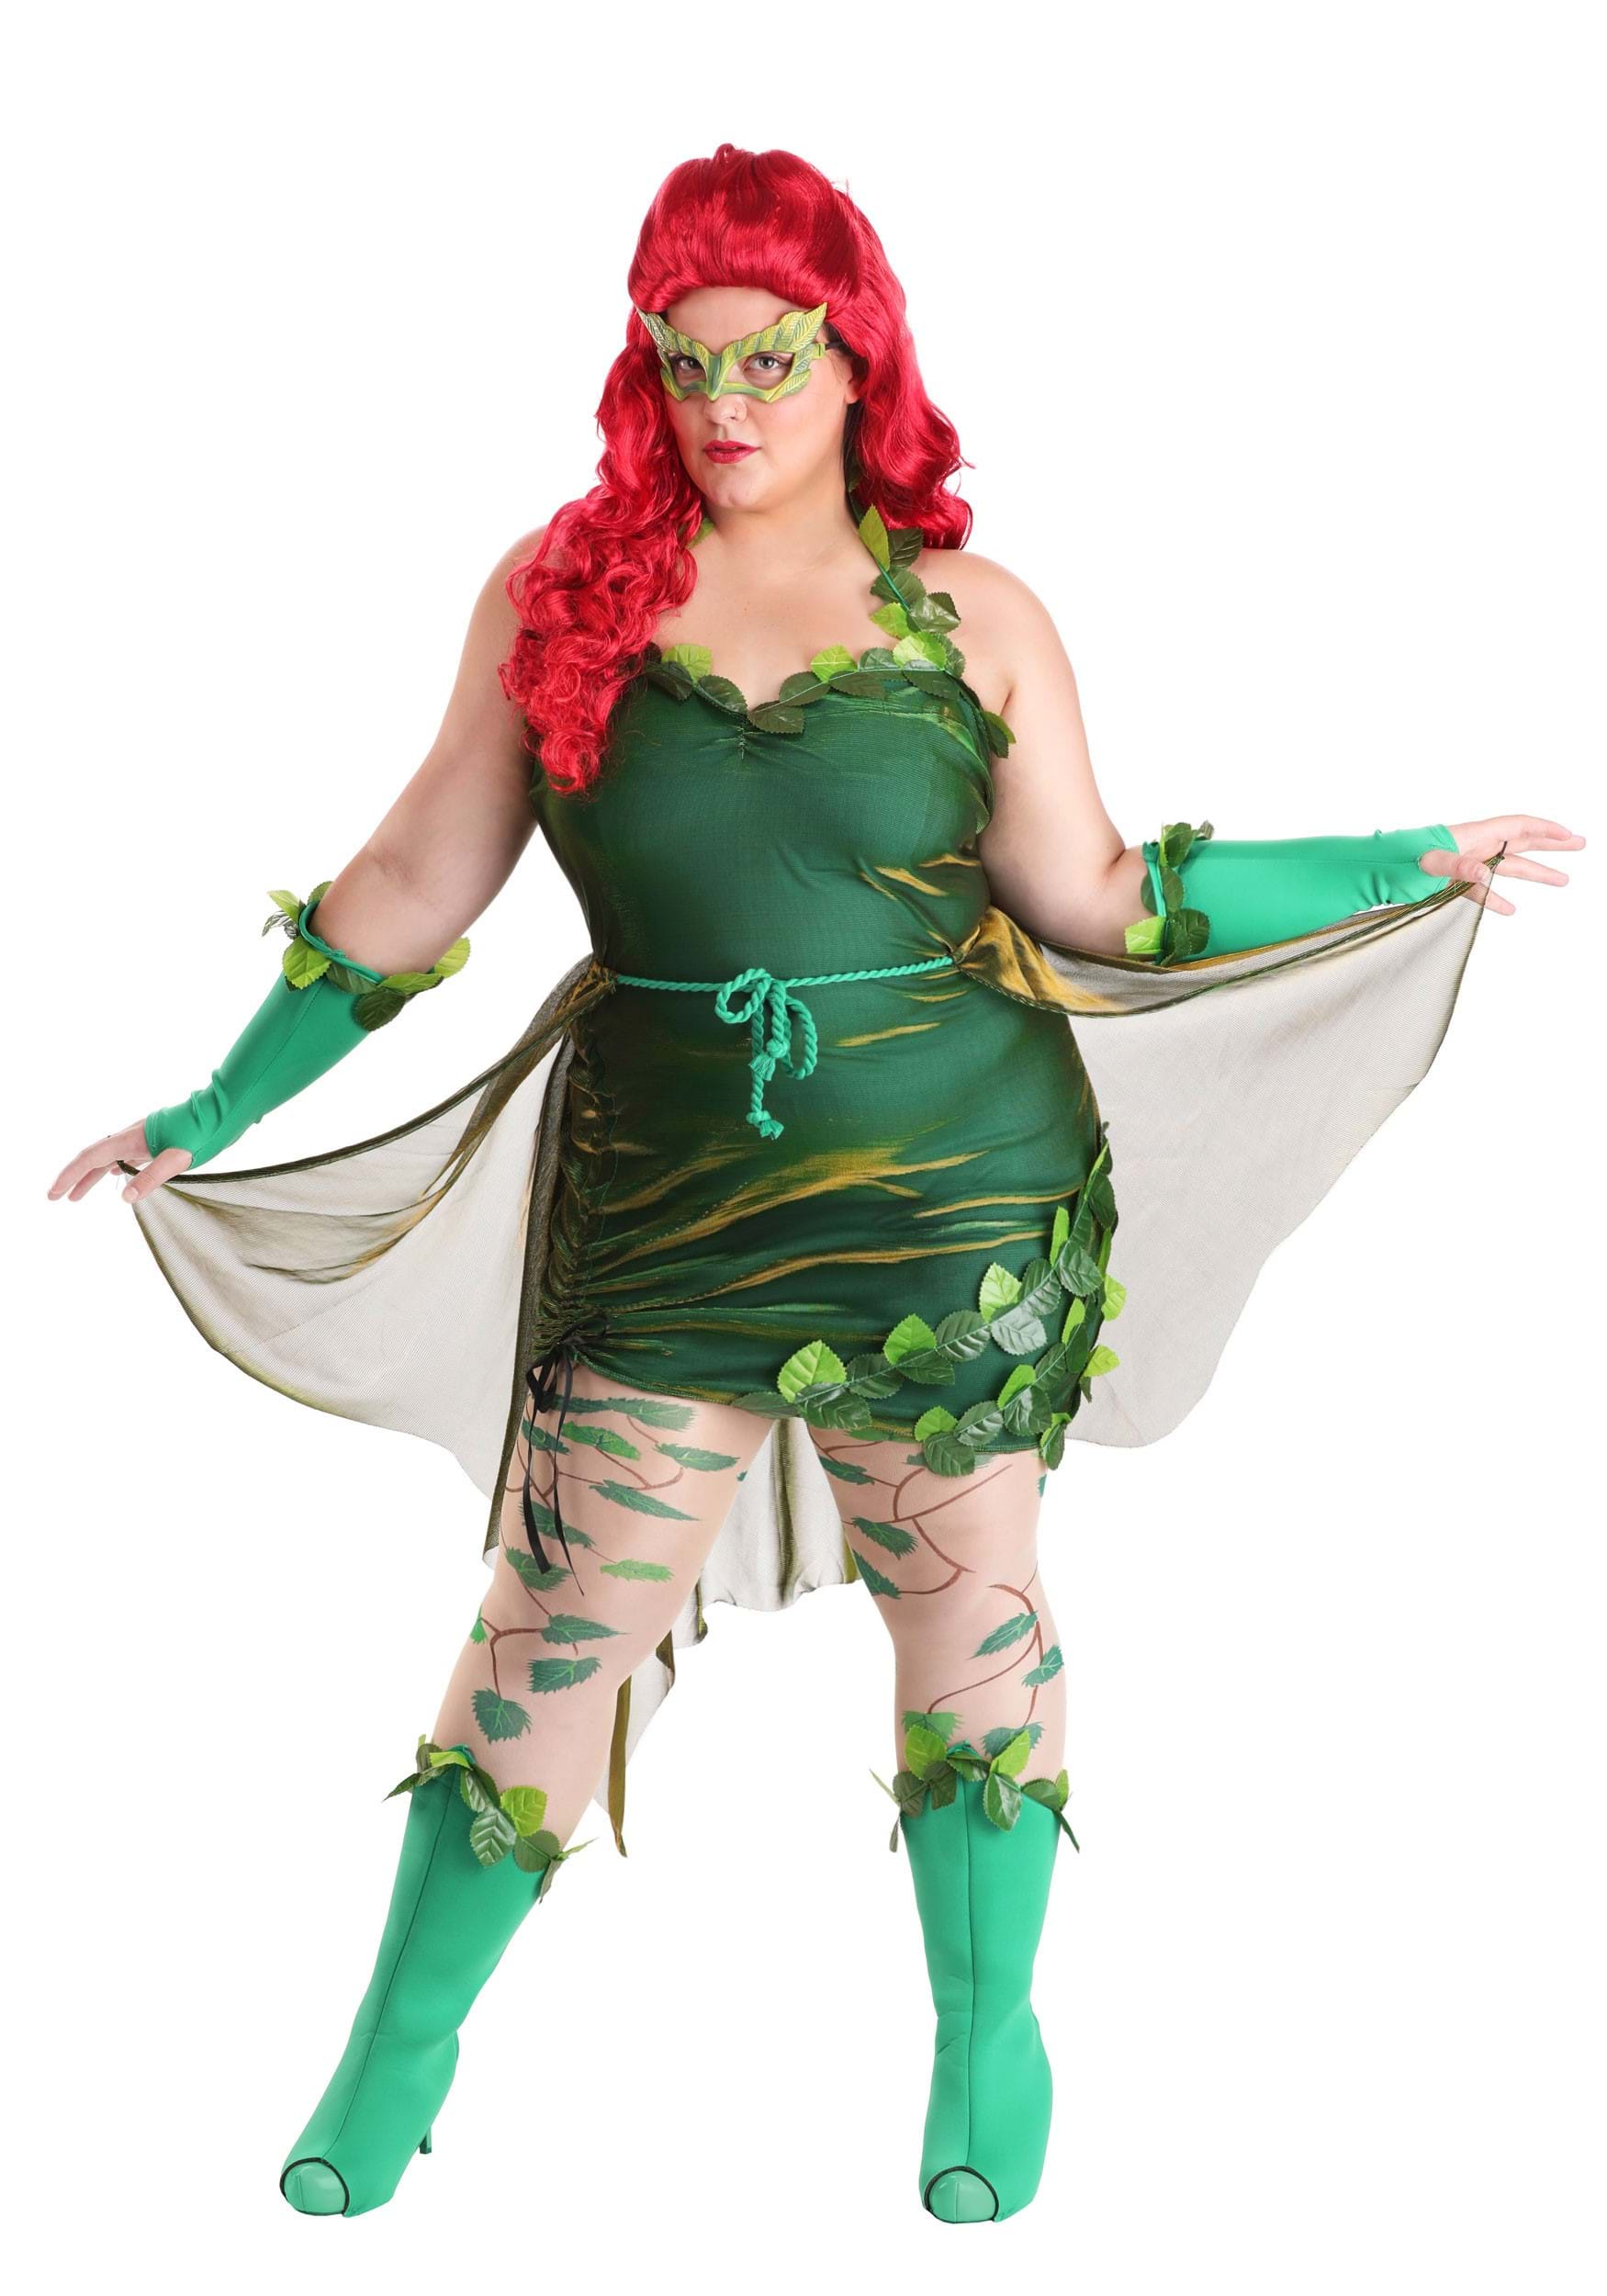 Photos - Fancy Dress California Costume Collection Plus Size Lethal Beauty Halloween Costume fo 